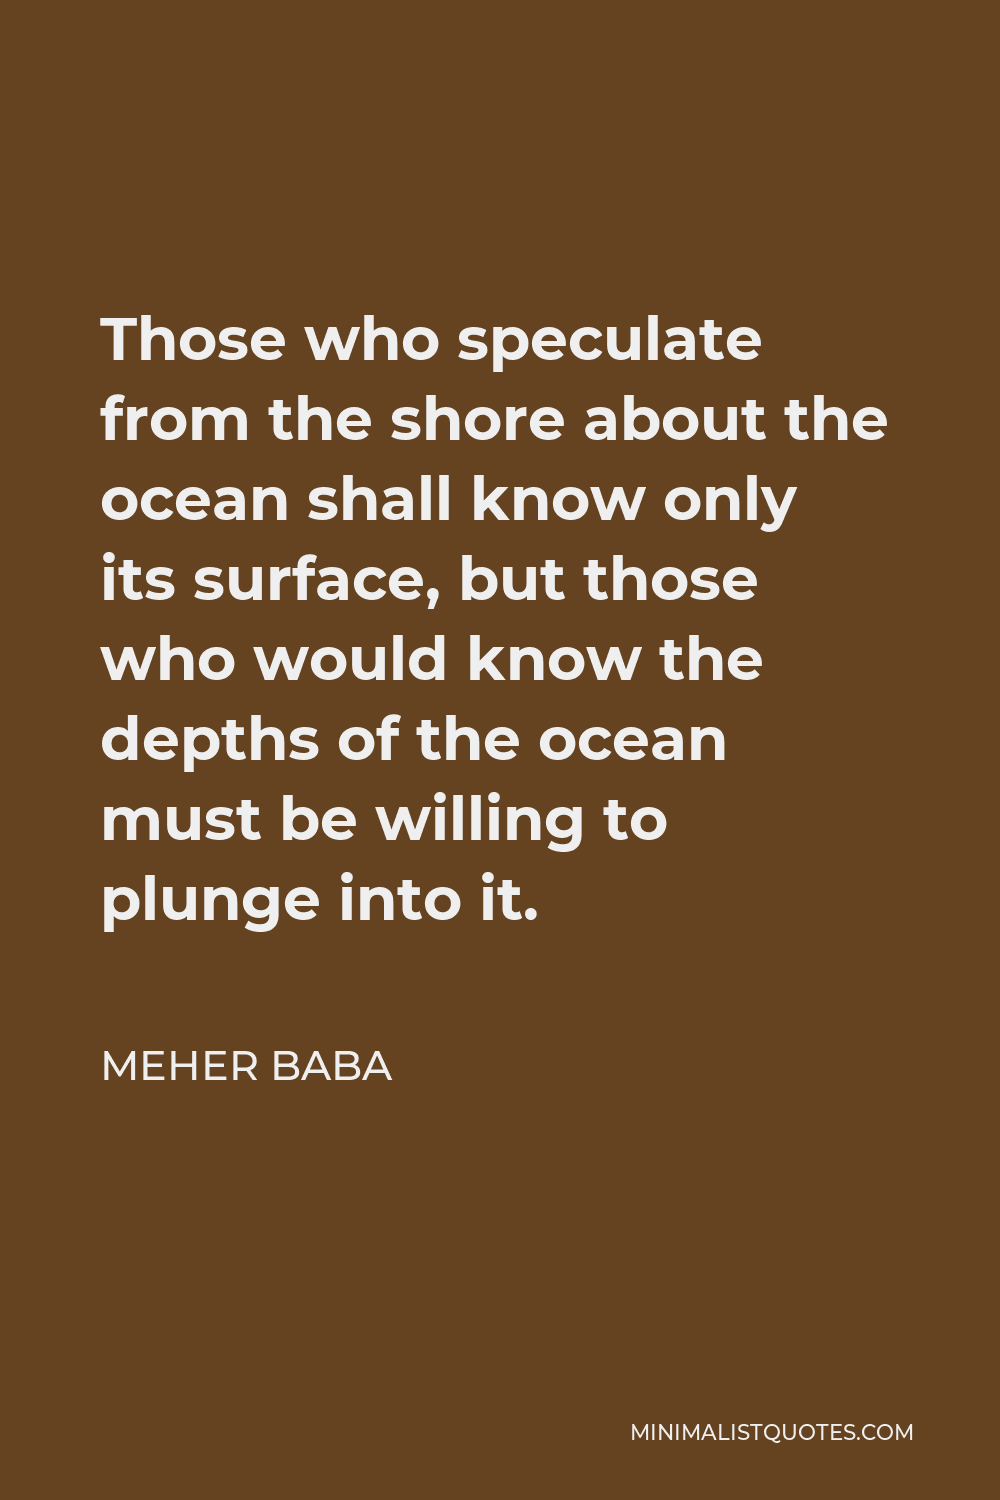 Meher Baba Quote - Those who speculate from the shore about the ocean shall know only its surface, but those who would know the depths of the ocean must be willing to plunge into it.